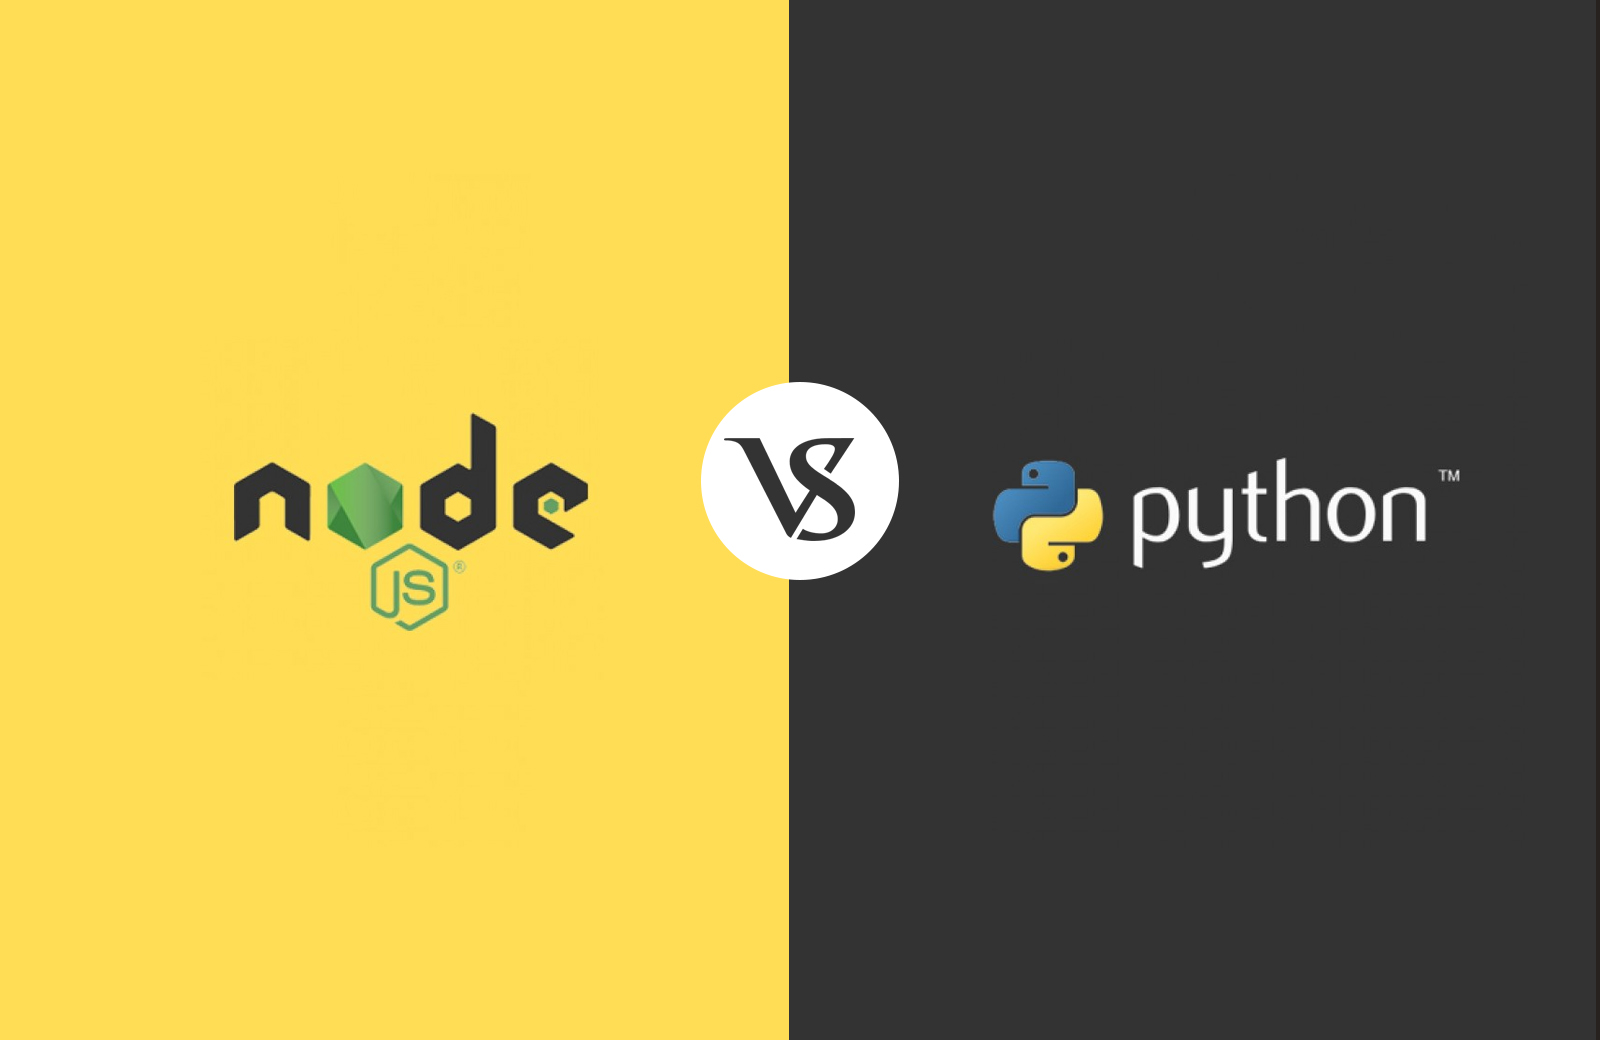 node.js vs python which is better